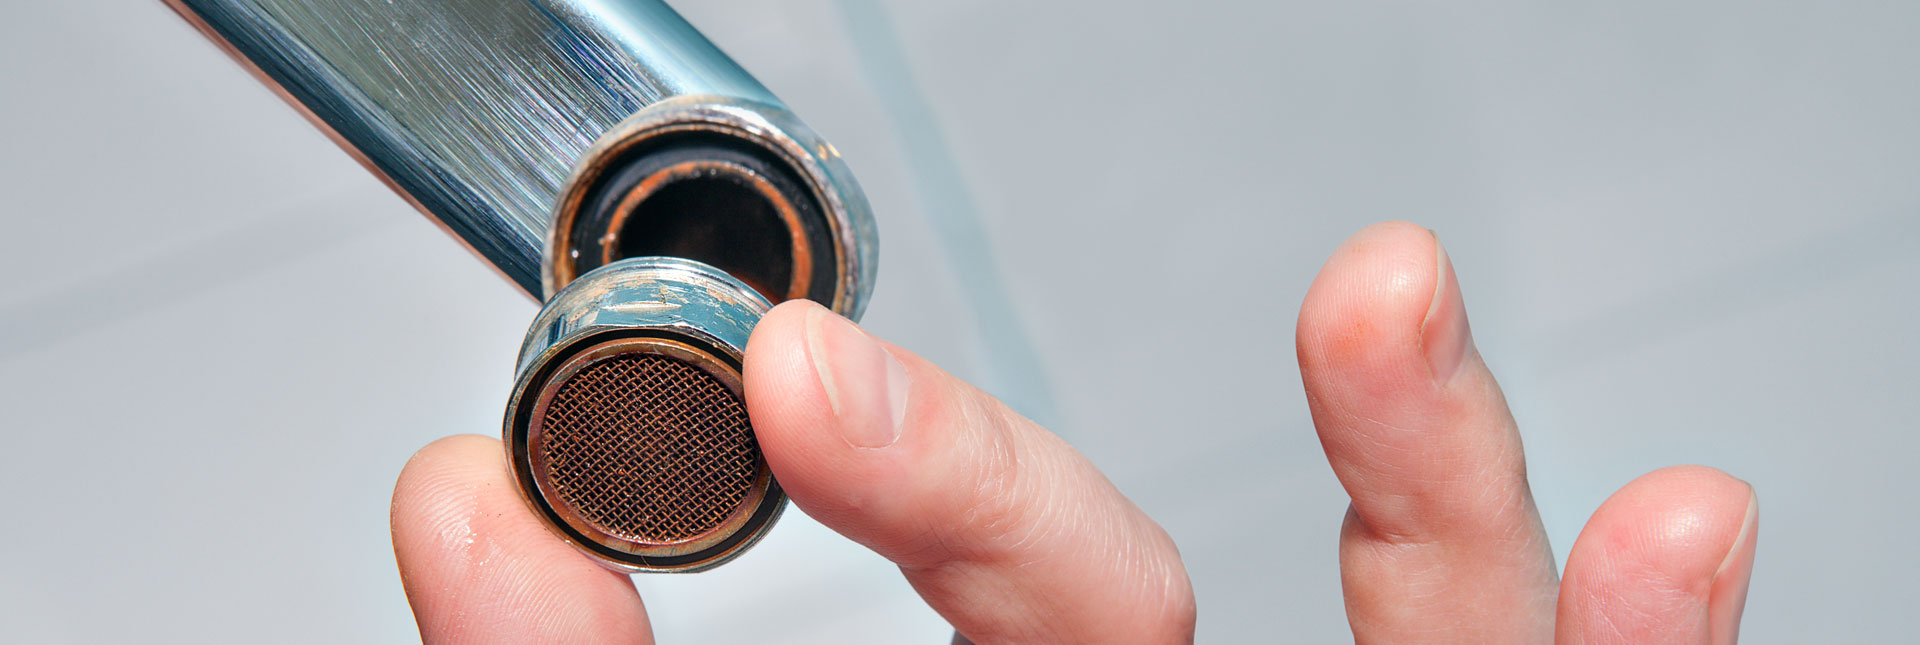 Faucet Aerators What Are Aerators And What Do They Do